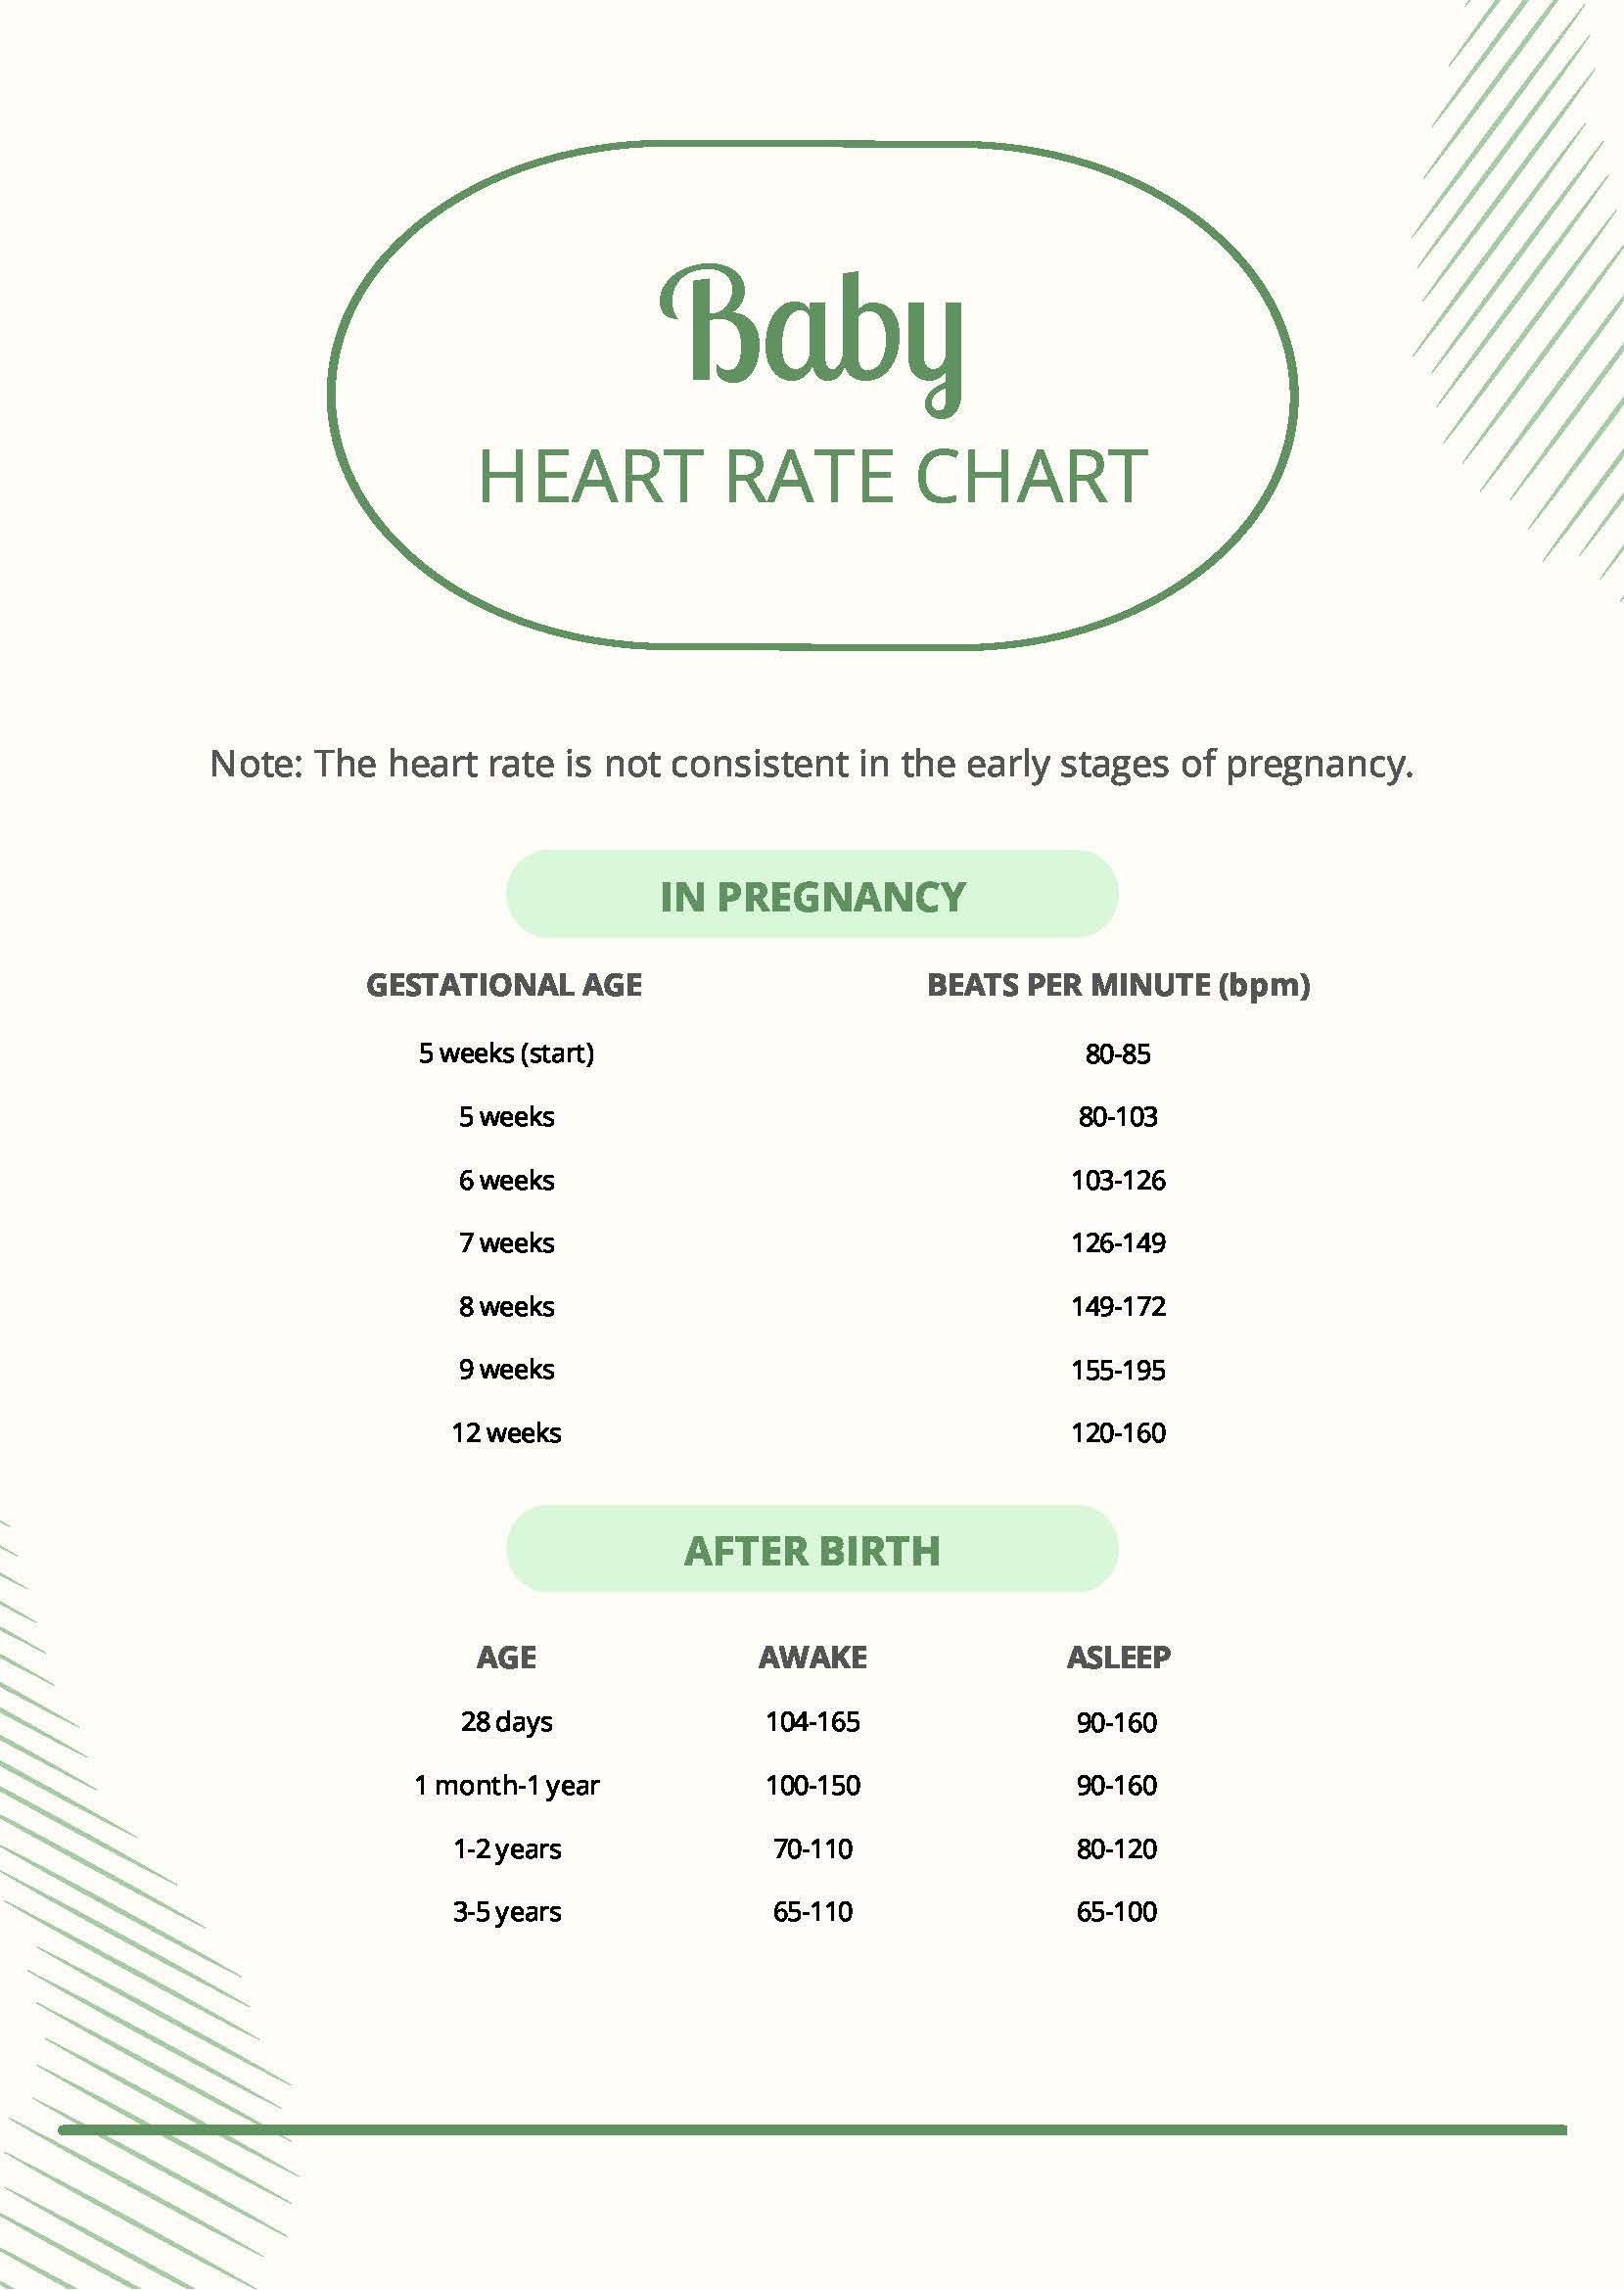 Baby Heart Rate Chart